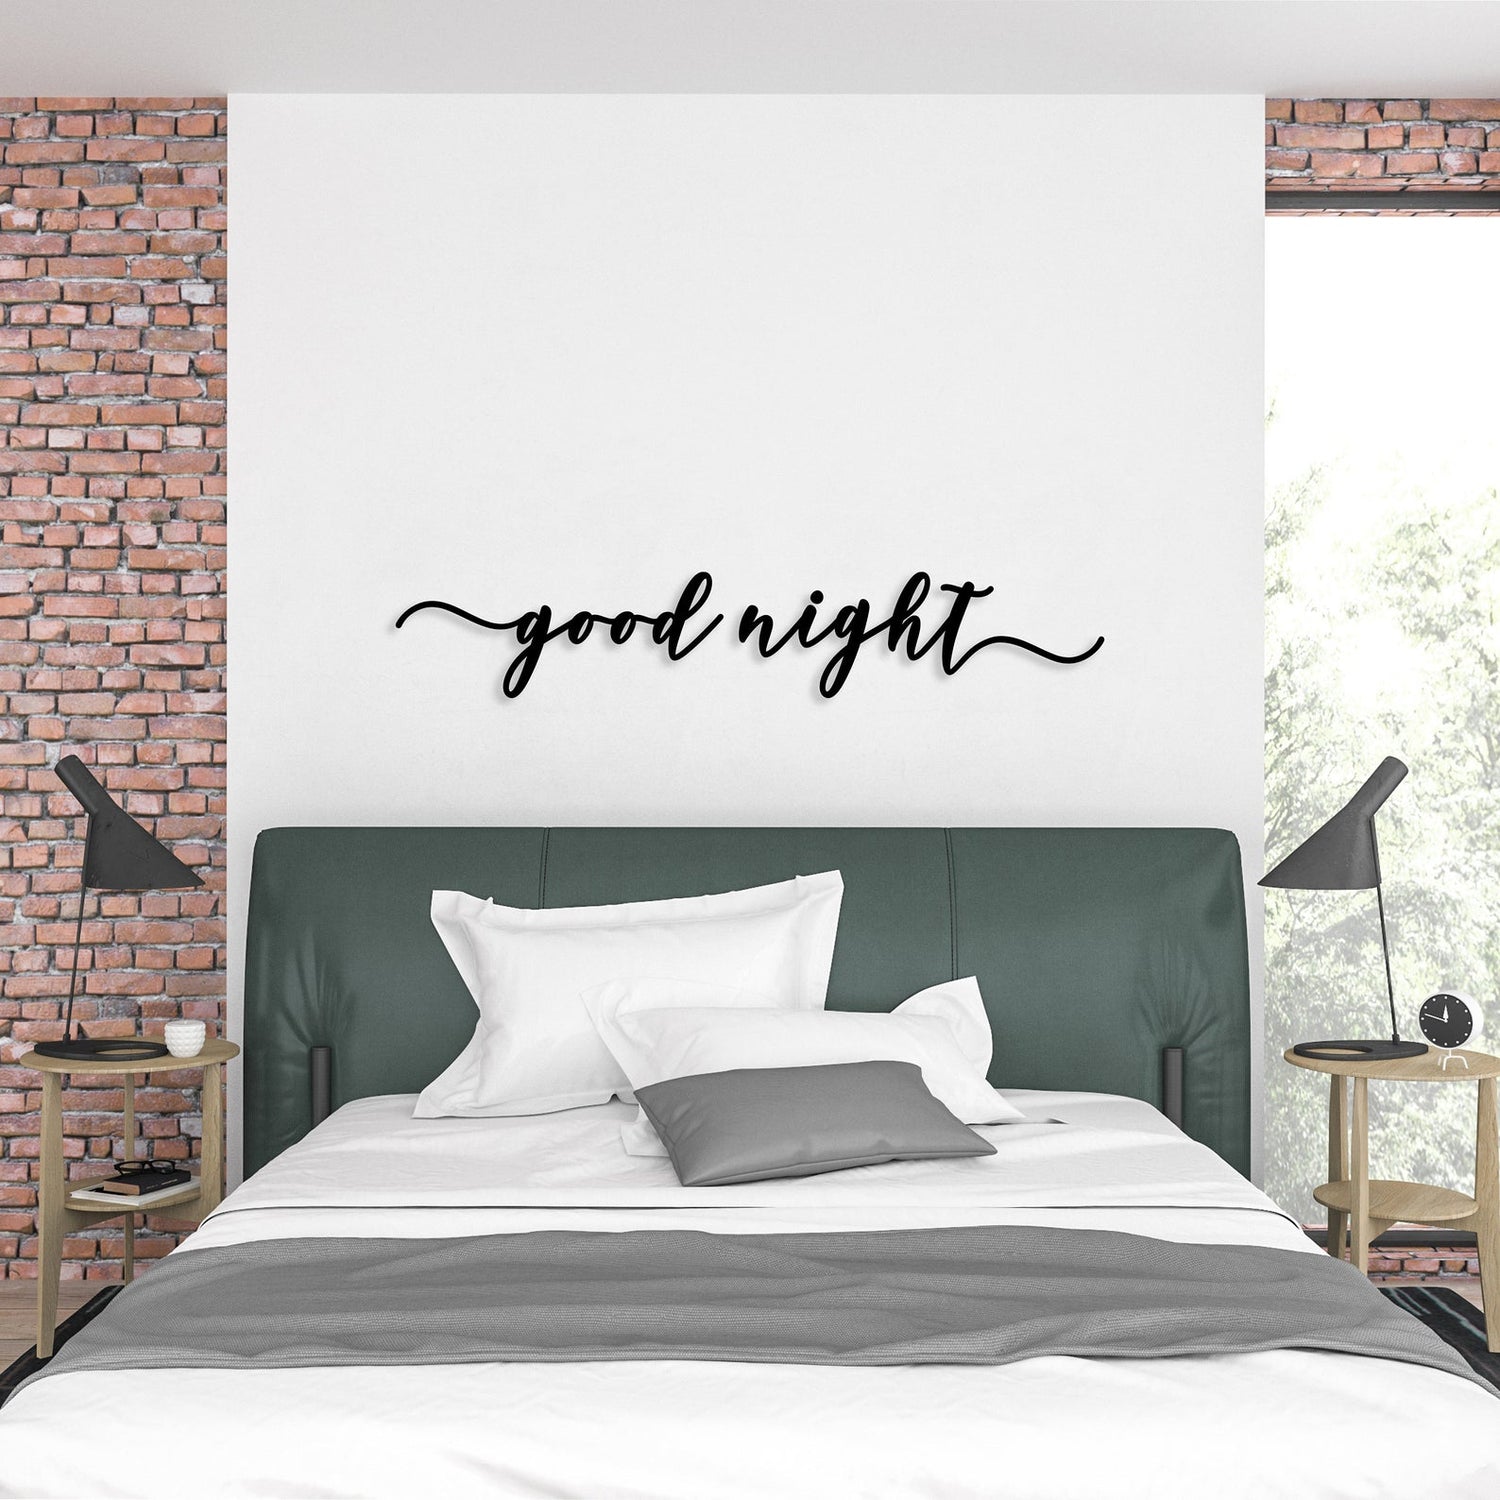 Delight Art Good Night and Sleep Night Wall Sticker Size - ( 86*67 ) cm  Model id - ( DAMC00466L ) : Amazon.in: Baby Products